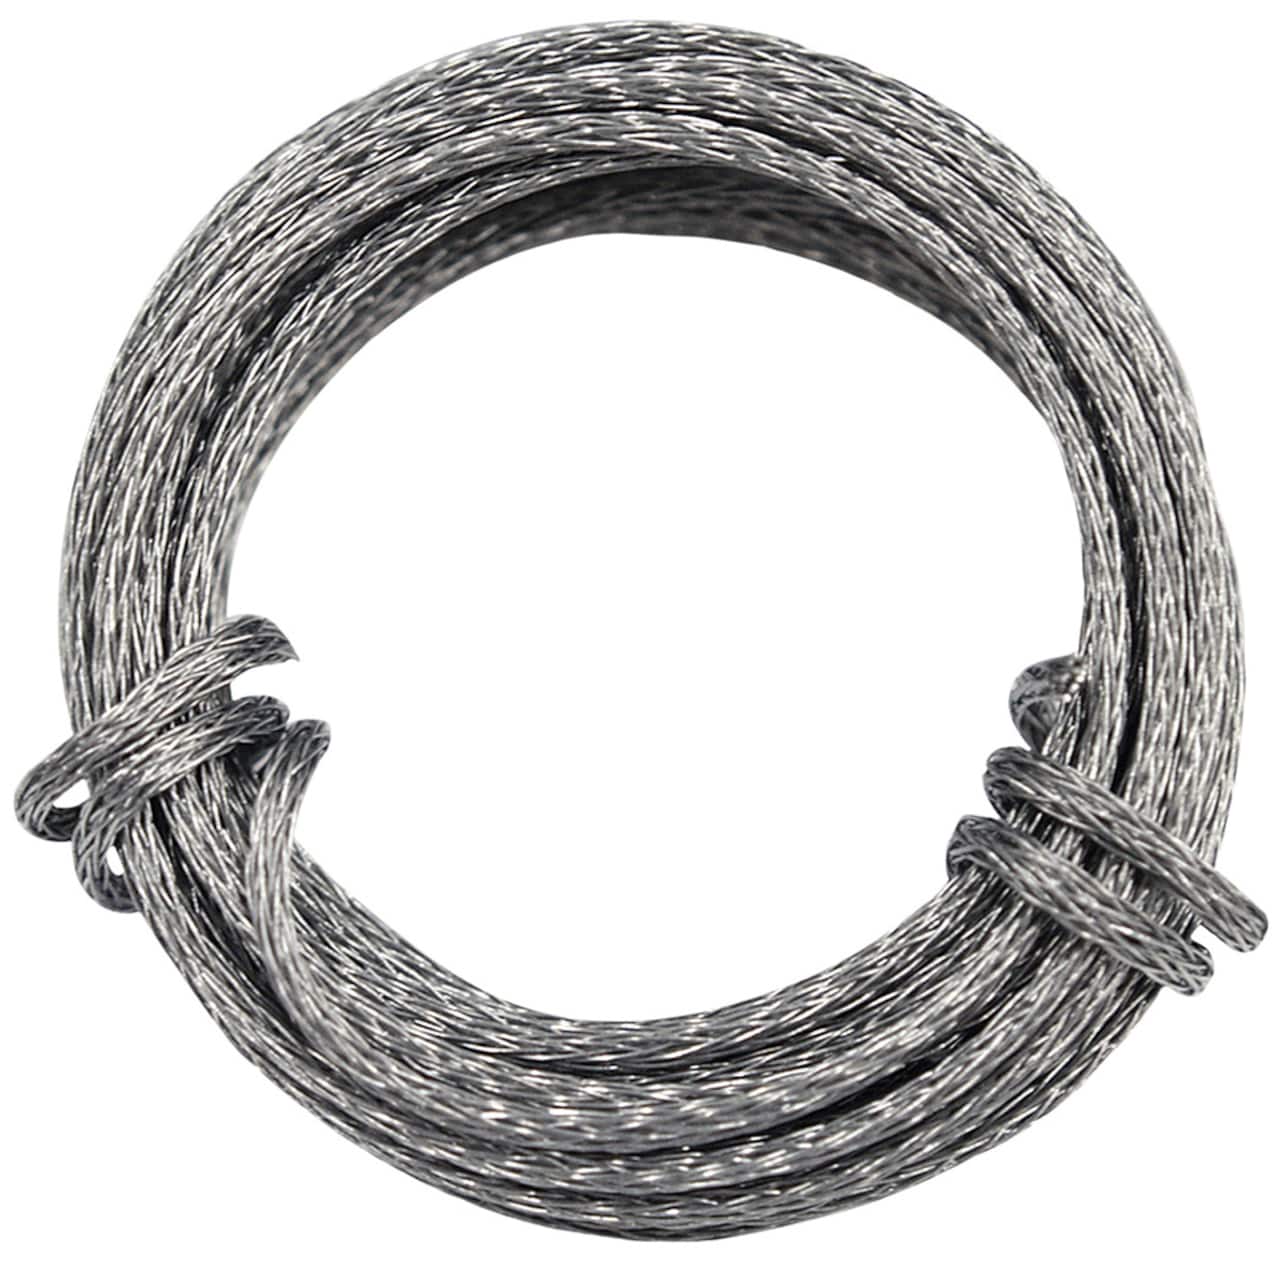 24 Pack: 9ft. Galvanized Braided Hanging Wire